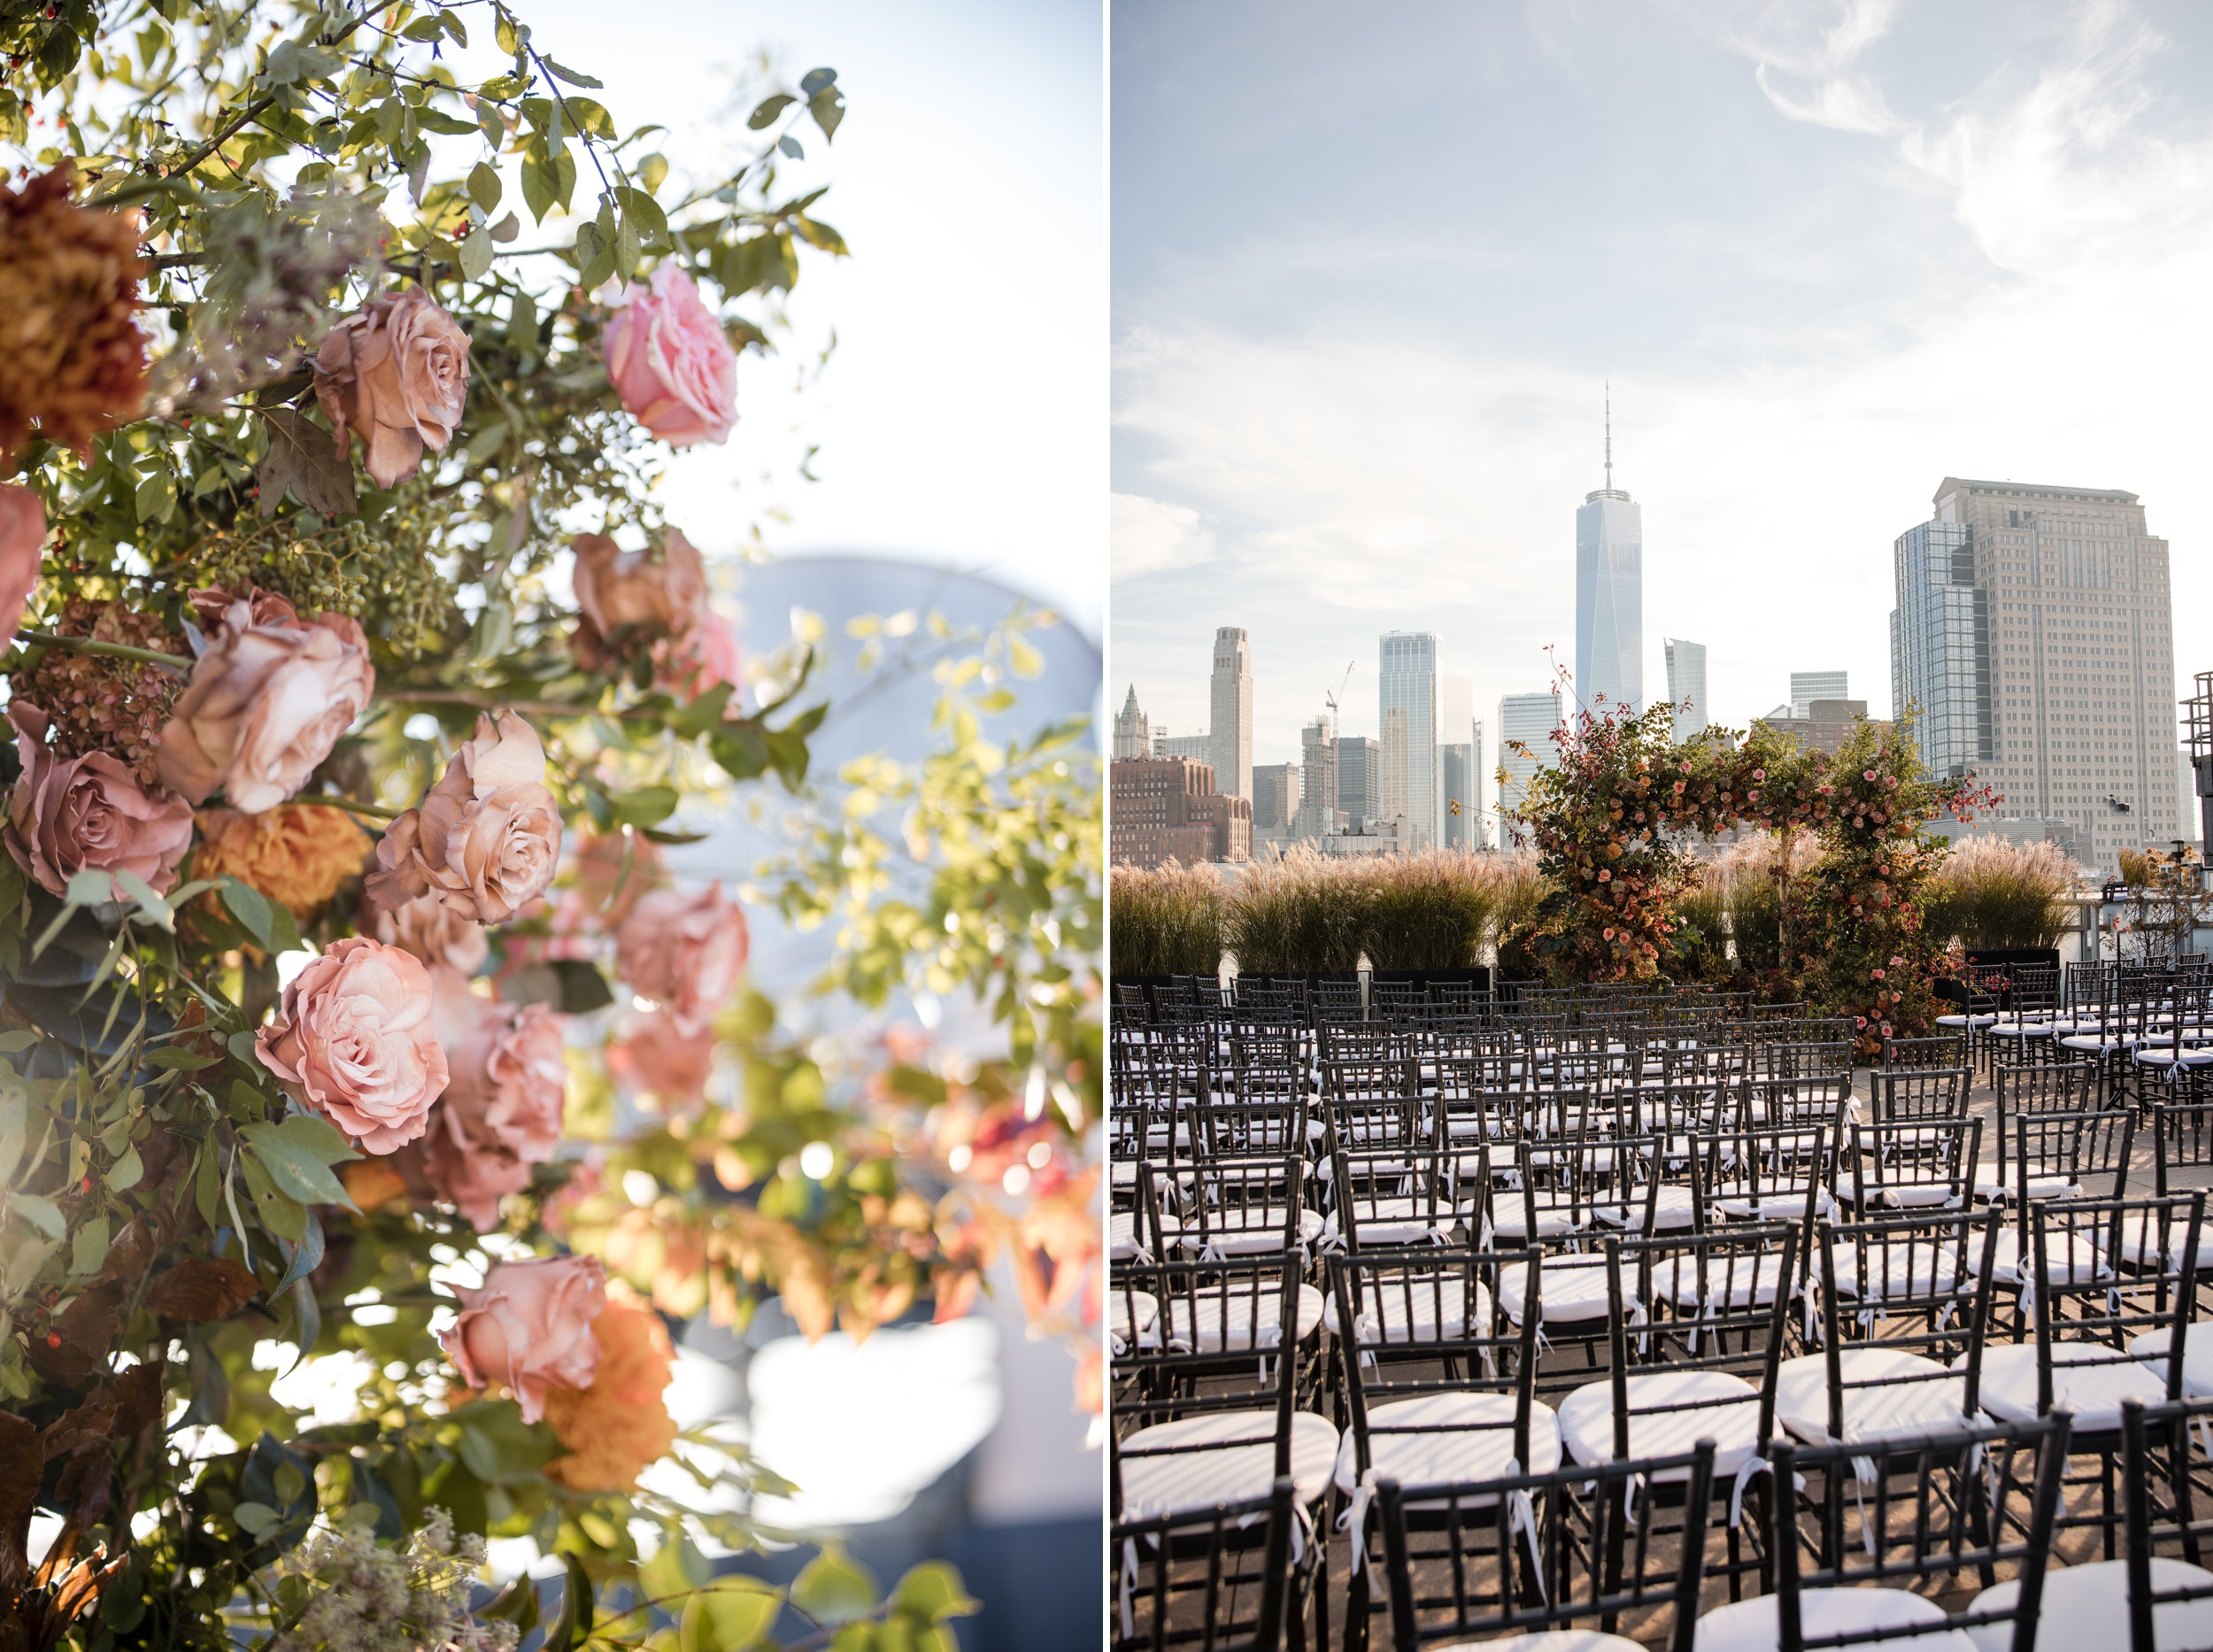 Rooftop decor and setup for an outdoor Tribeca Rooftop wedding